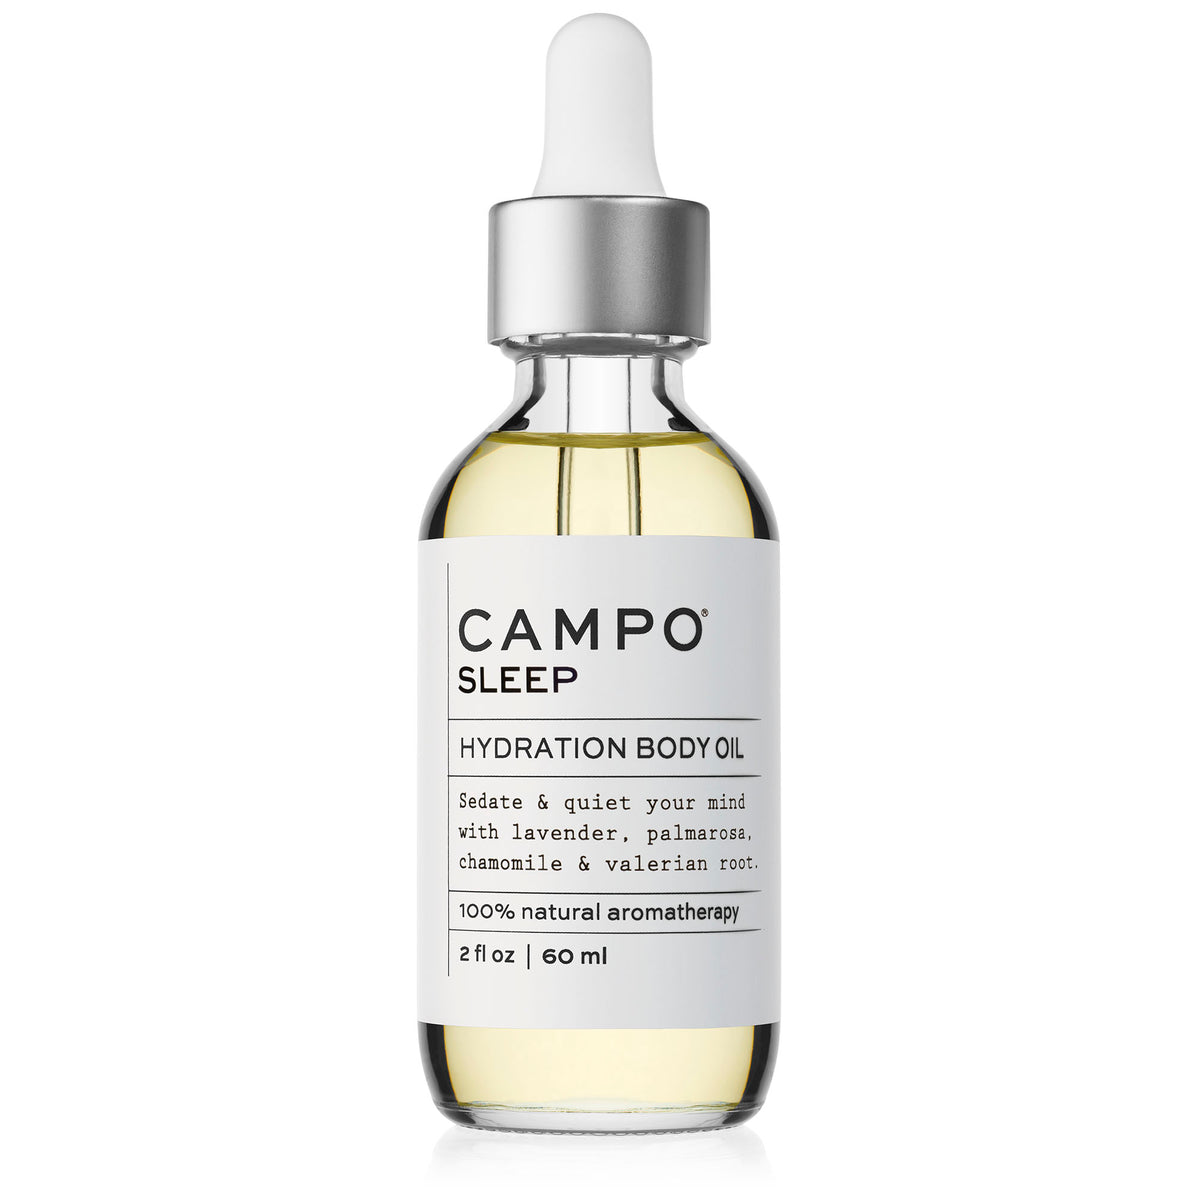 Campo Beauty Hydration Body Oil - SLEEP Blend that in 60 ml. Fall into a deep sleep with this 100% natural essential oil roll-on blend of French Lavender, Palmarosa, Roman Chamomile, and Valerian Root.  Gives your skin an infusion of nourishing &amp; deep hydration.